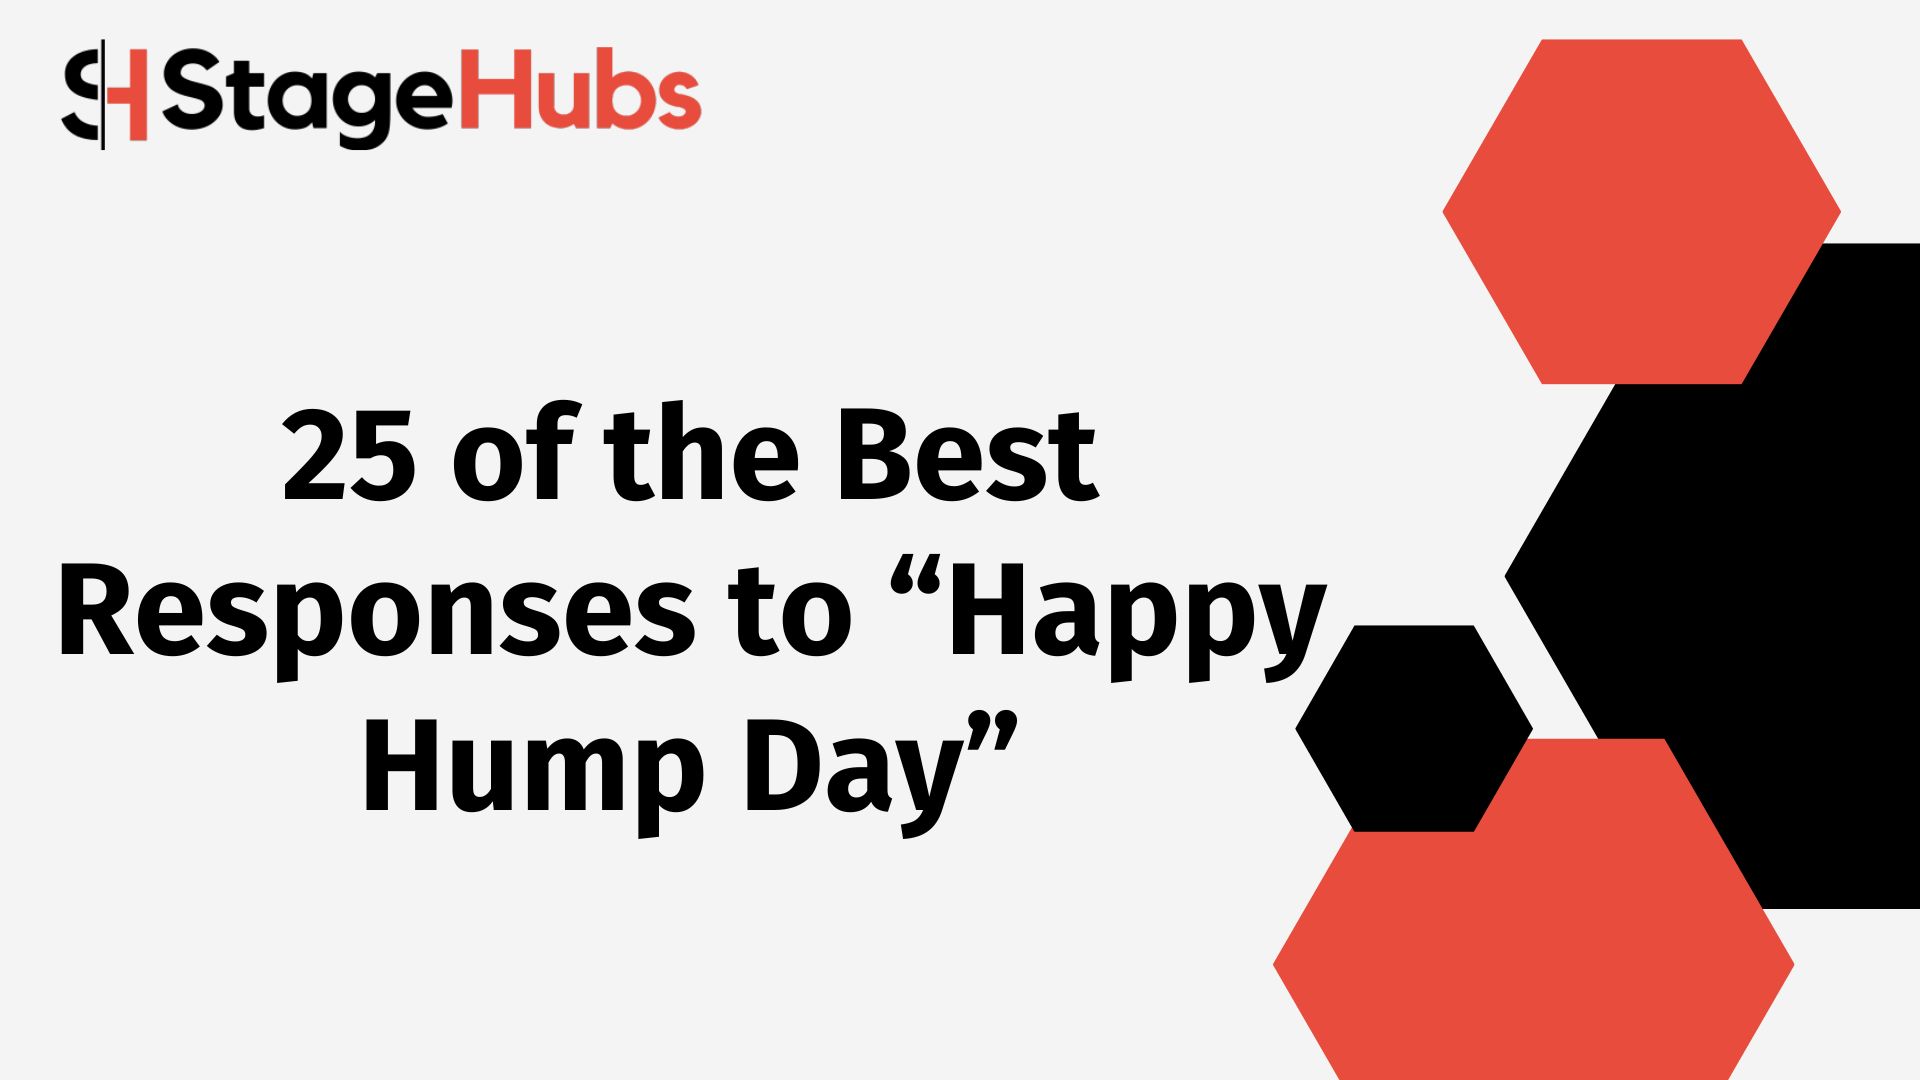 25 Of The Best Responses To “happy Hump Day”